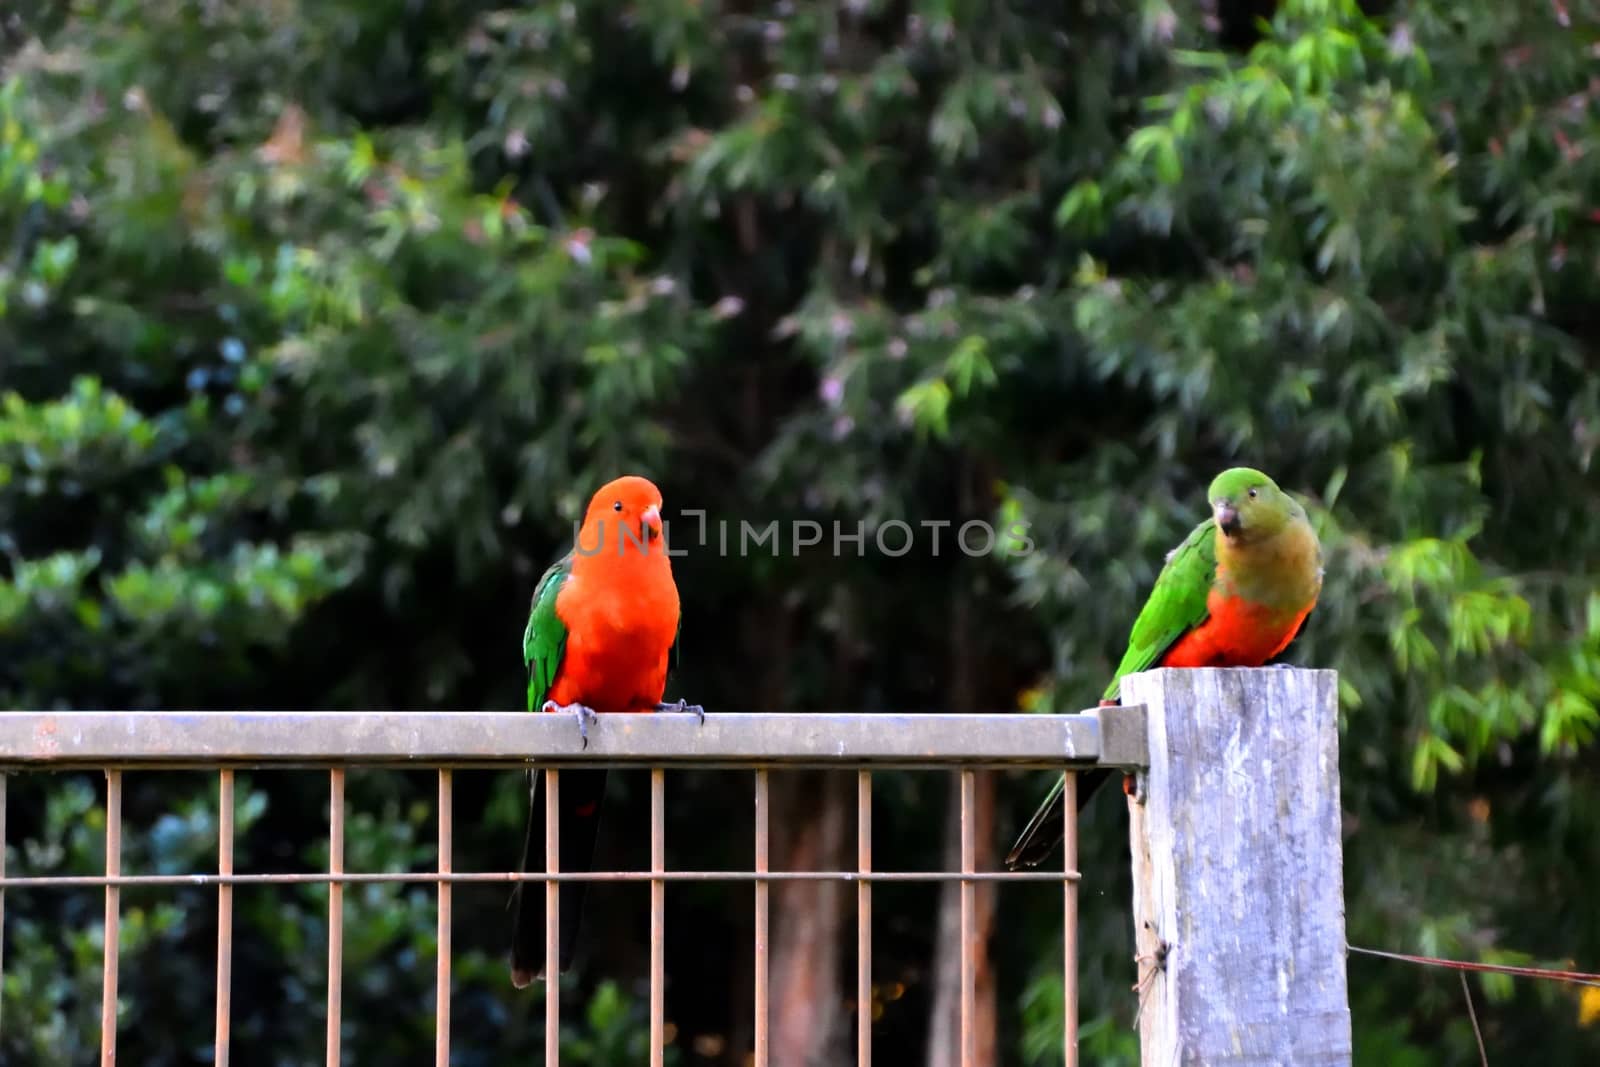 Two king parrots flirting with each other on a fence